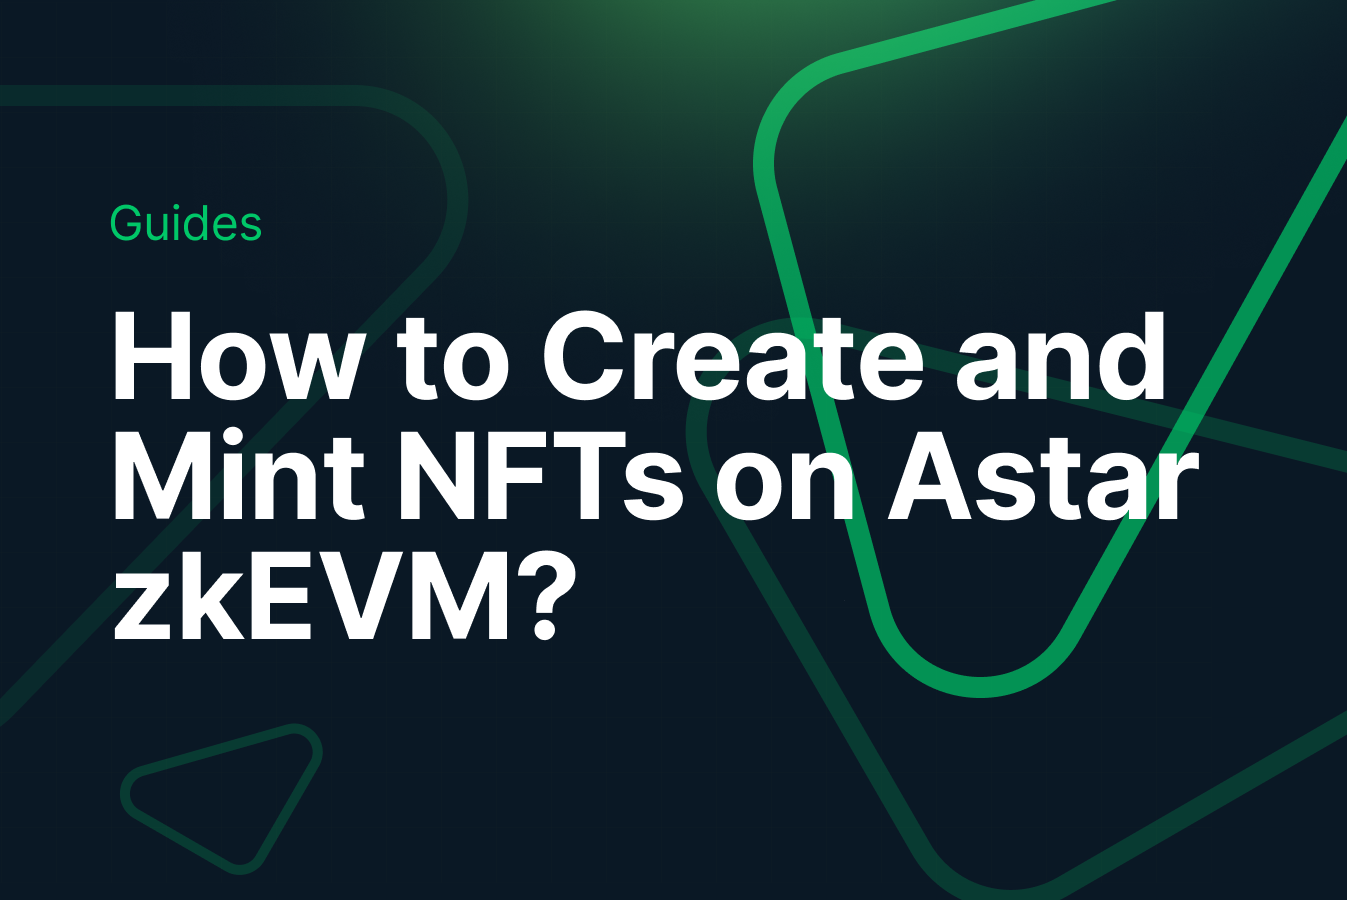 How to Create and Mint NFTs on Astar zkEVM?